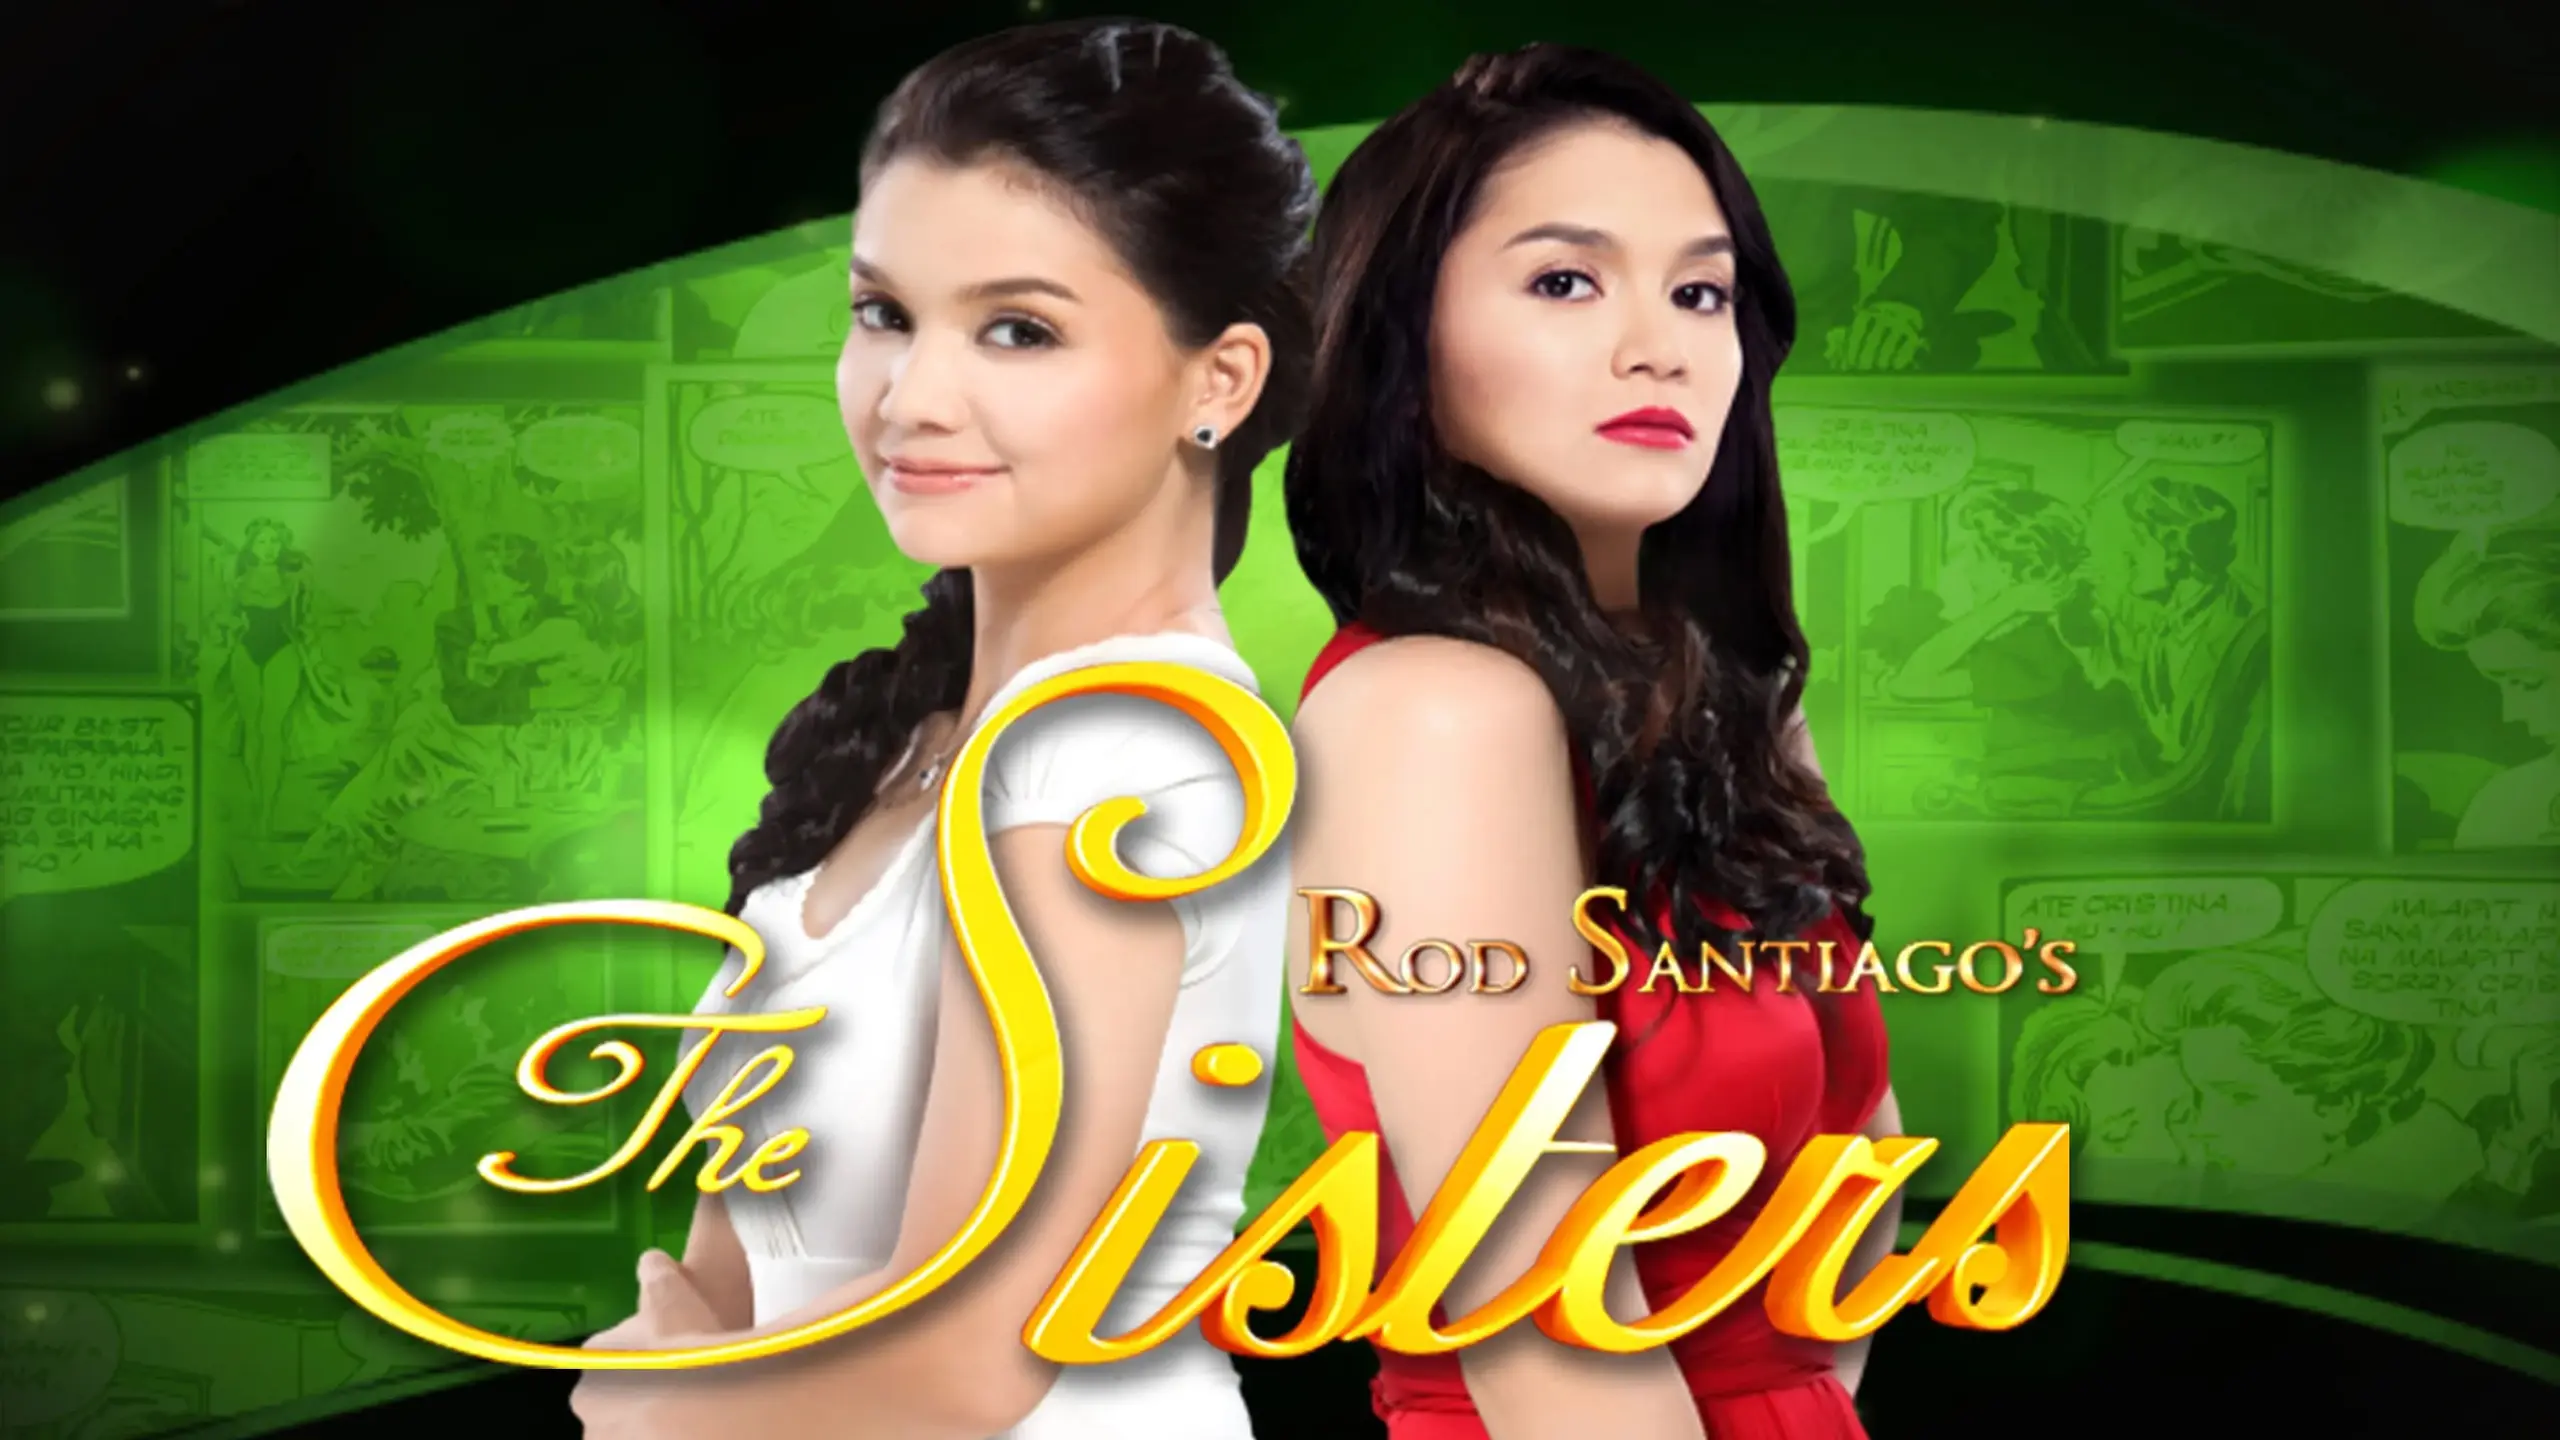 Rod Santiago's The Sisters